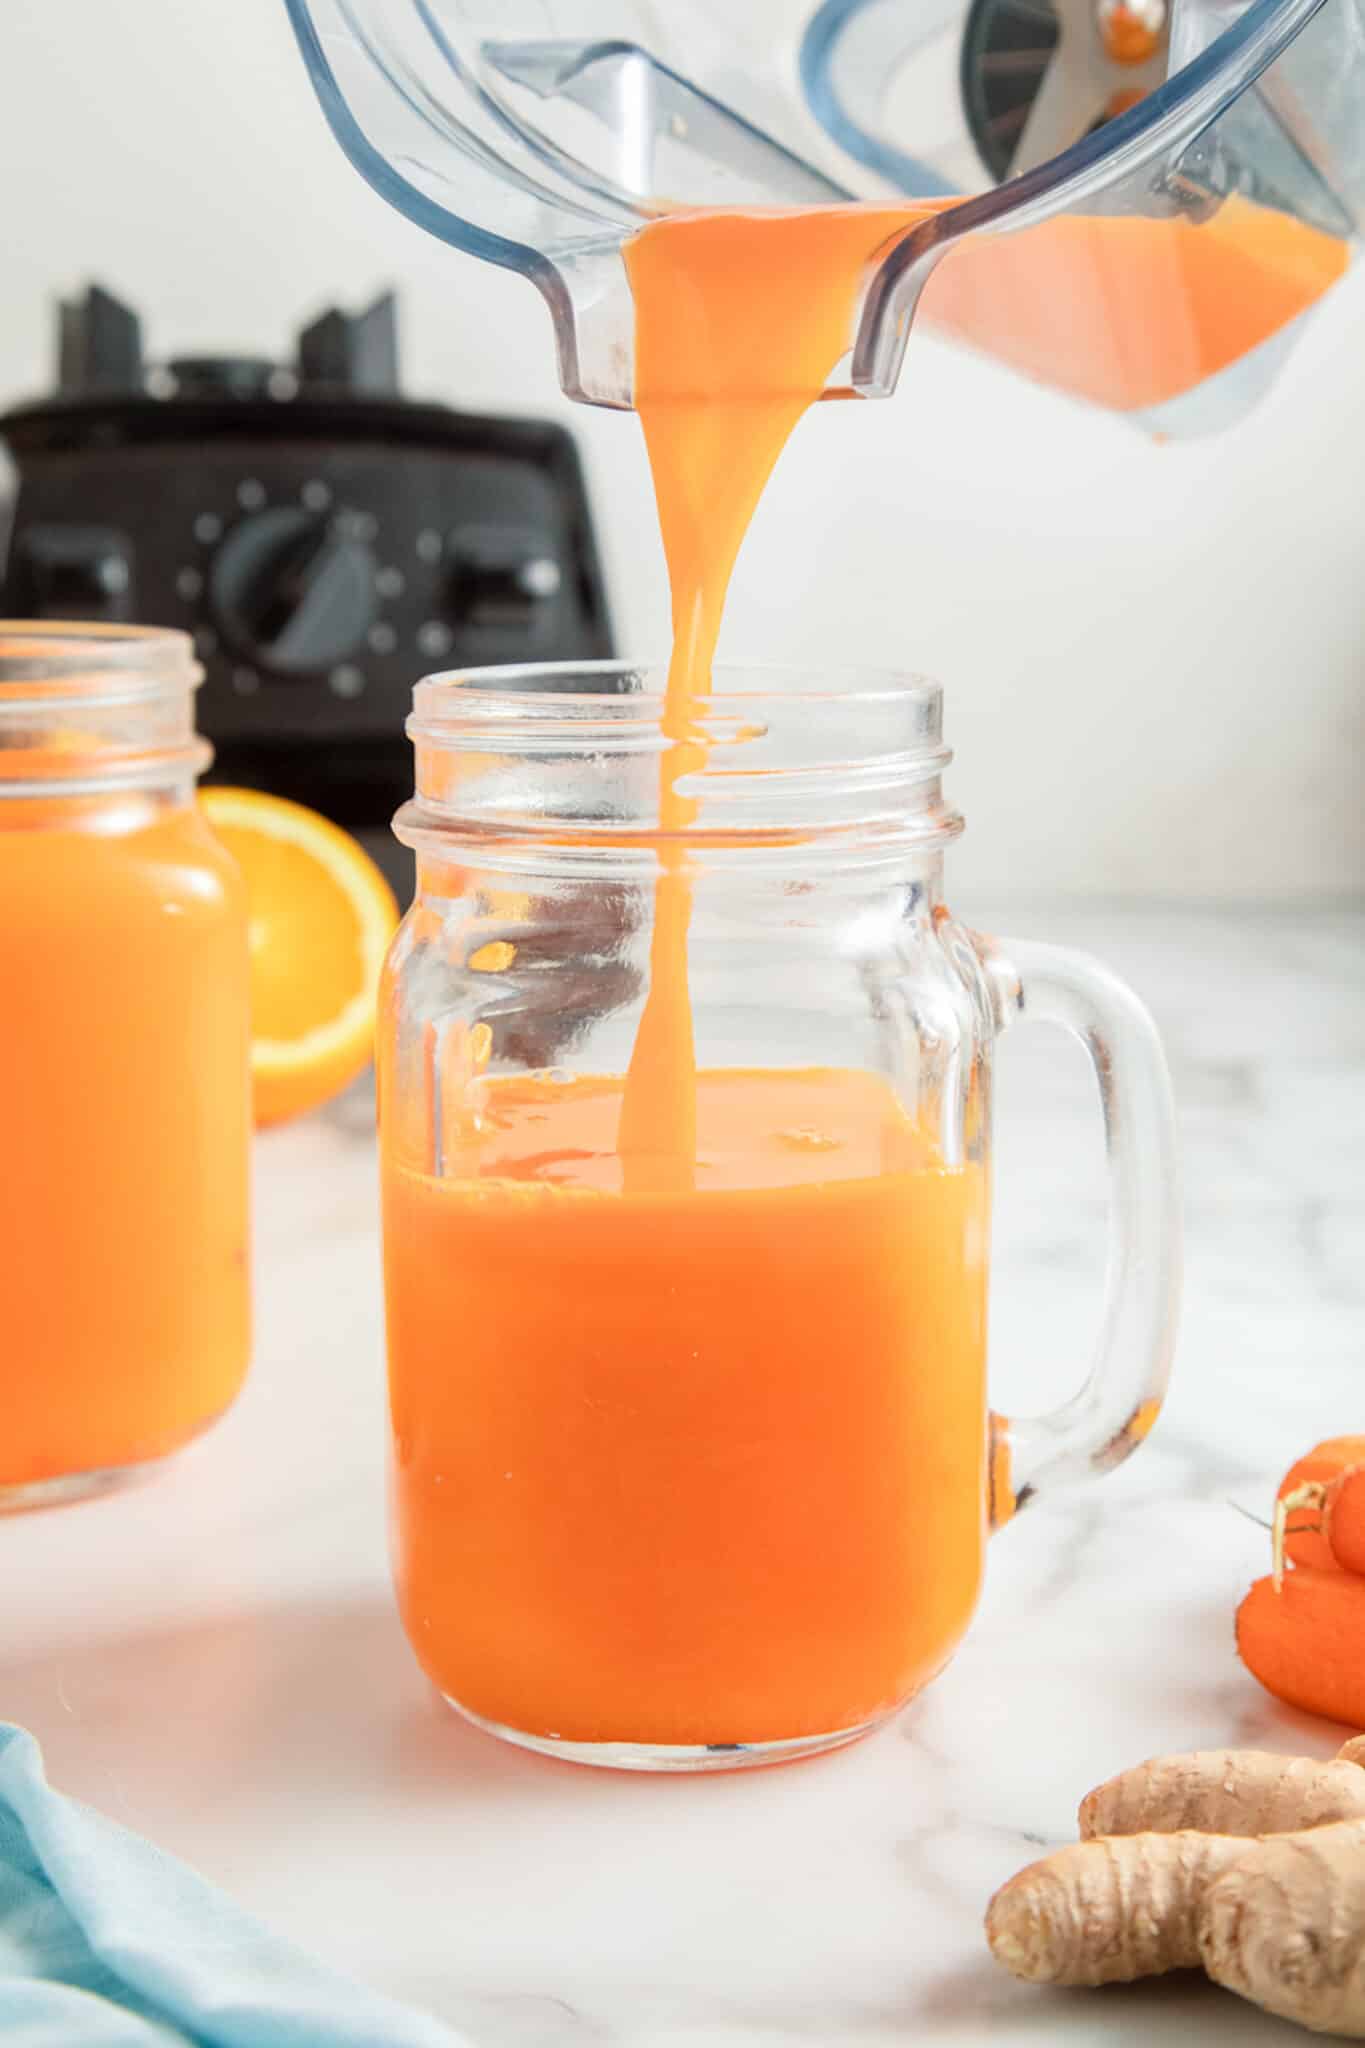 pouring carrot juice into a glass.